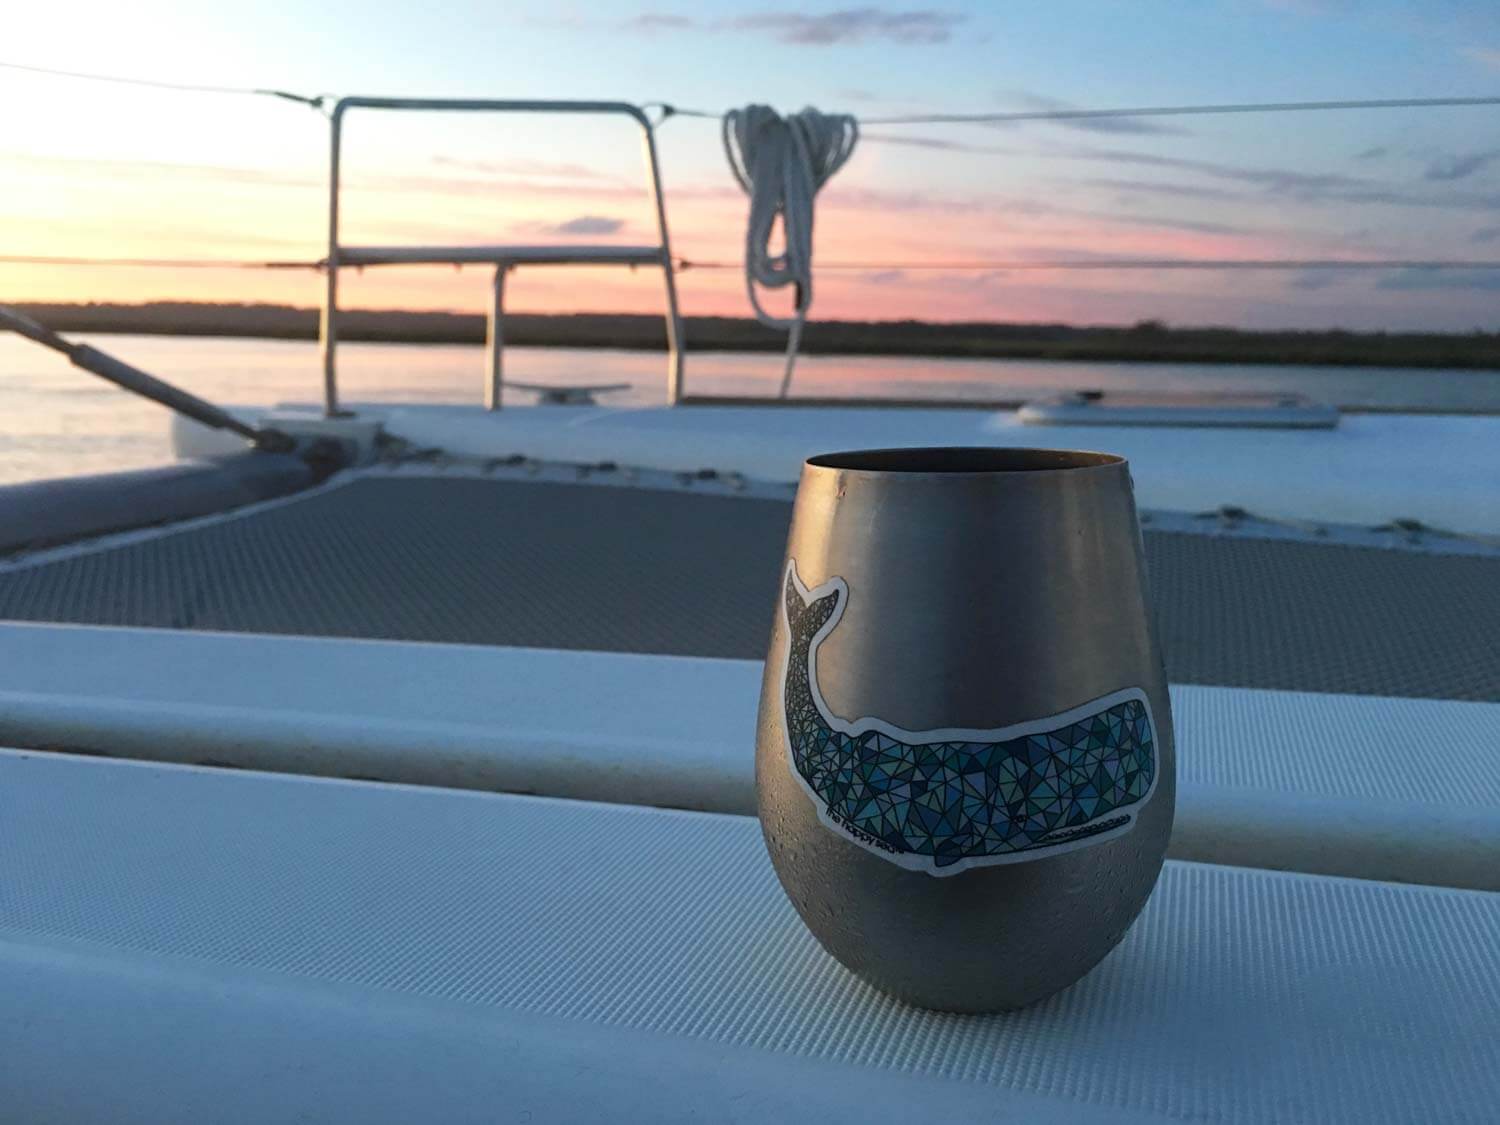 stainless steel wine glass on boat deck with sunset in the background